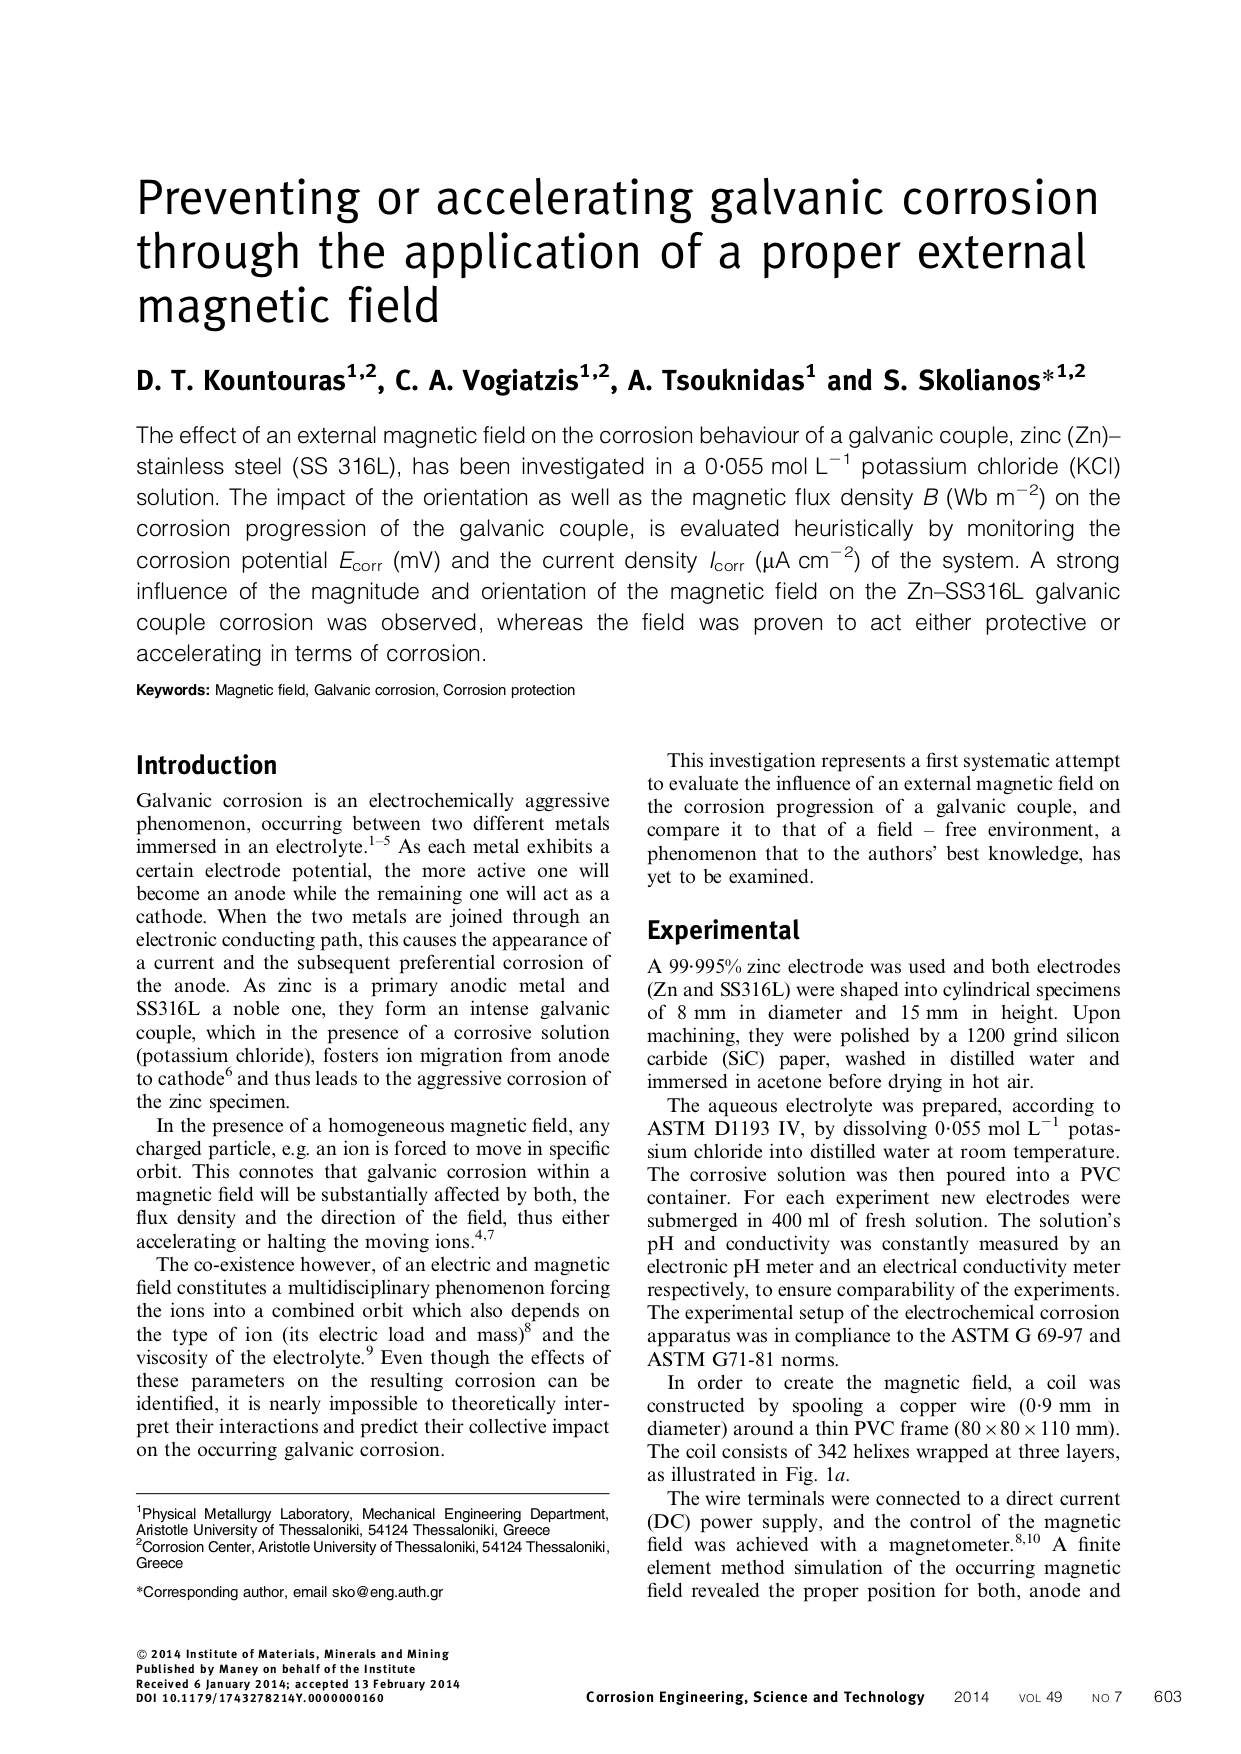 Preventing or accelerating galvanic corrosion through the application of a proper external magnetic field_page-0001.jpg